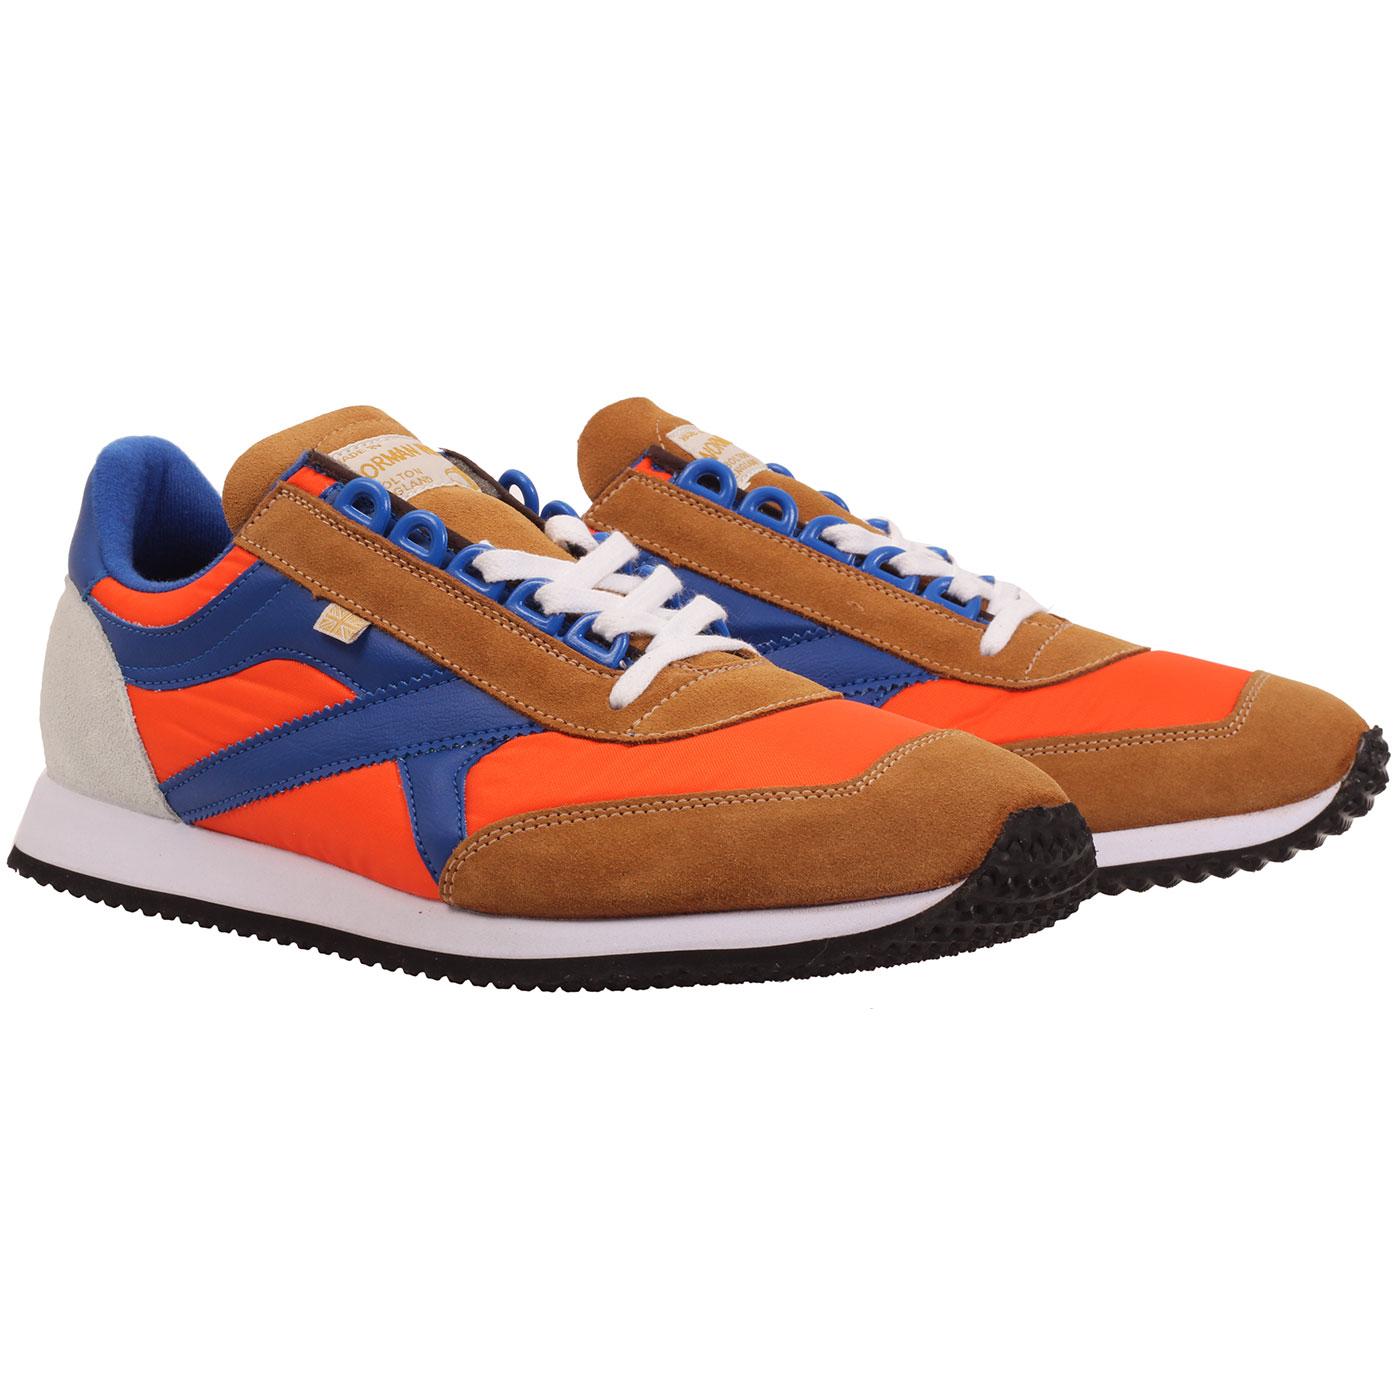 WALSH Voyager Made in England Retro Running Trainers Orange